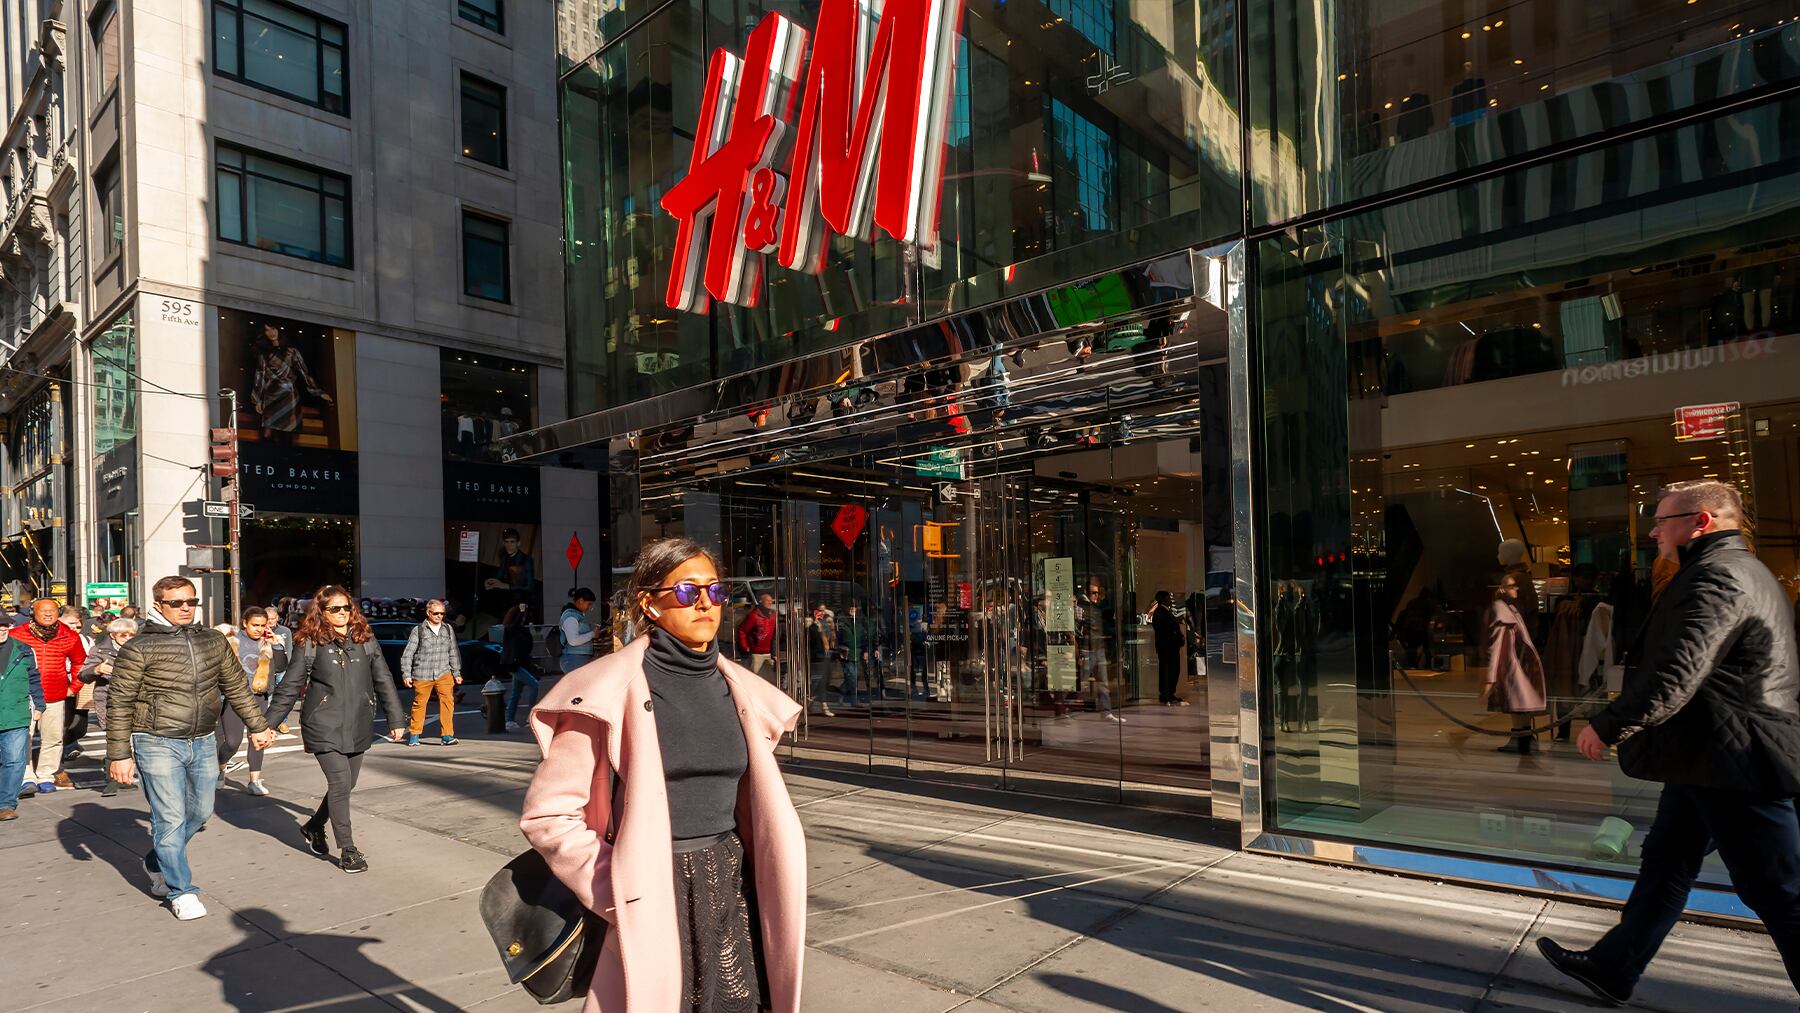 All brands with revenues of greater than $100 million that transact in New York State are covered by the Act, which effectively means all major fashion brands, from Louis Vuitton to H&M.